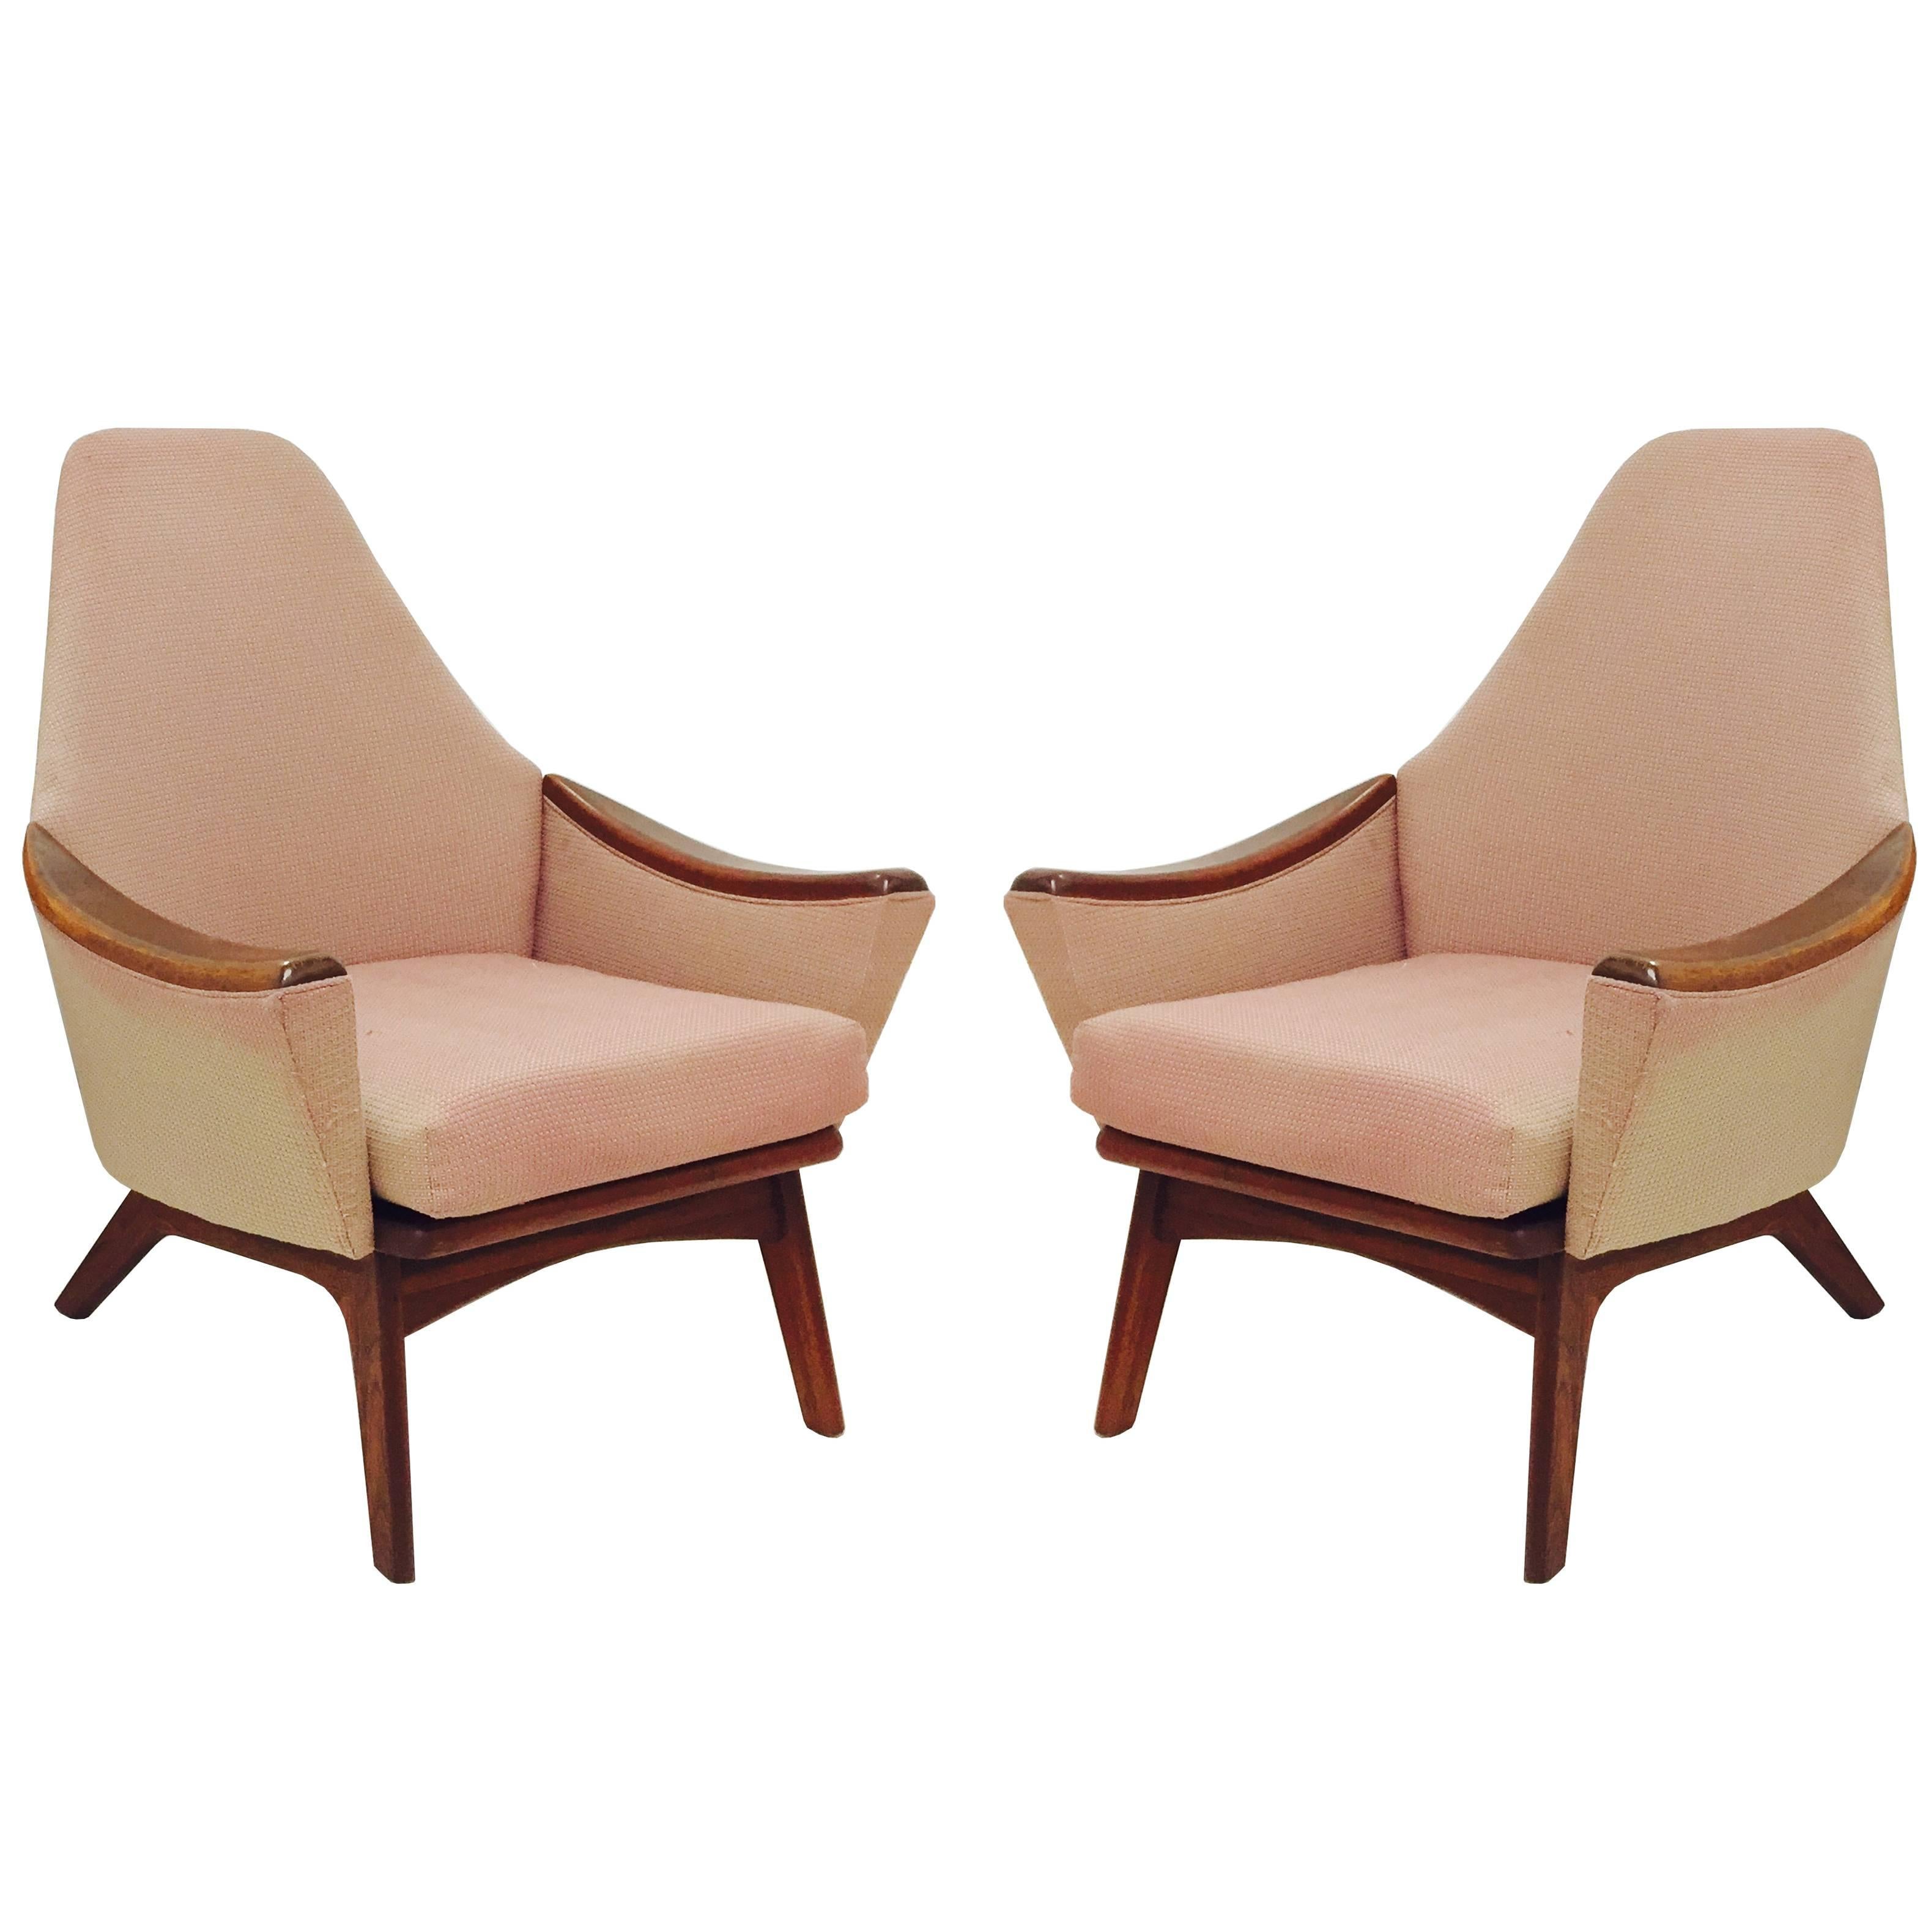 Pair of High Back Lounge Chairs by Adrian Pearsall for Craft Associates